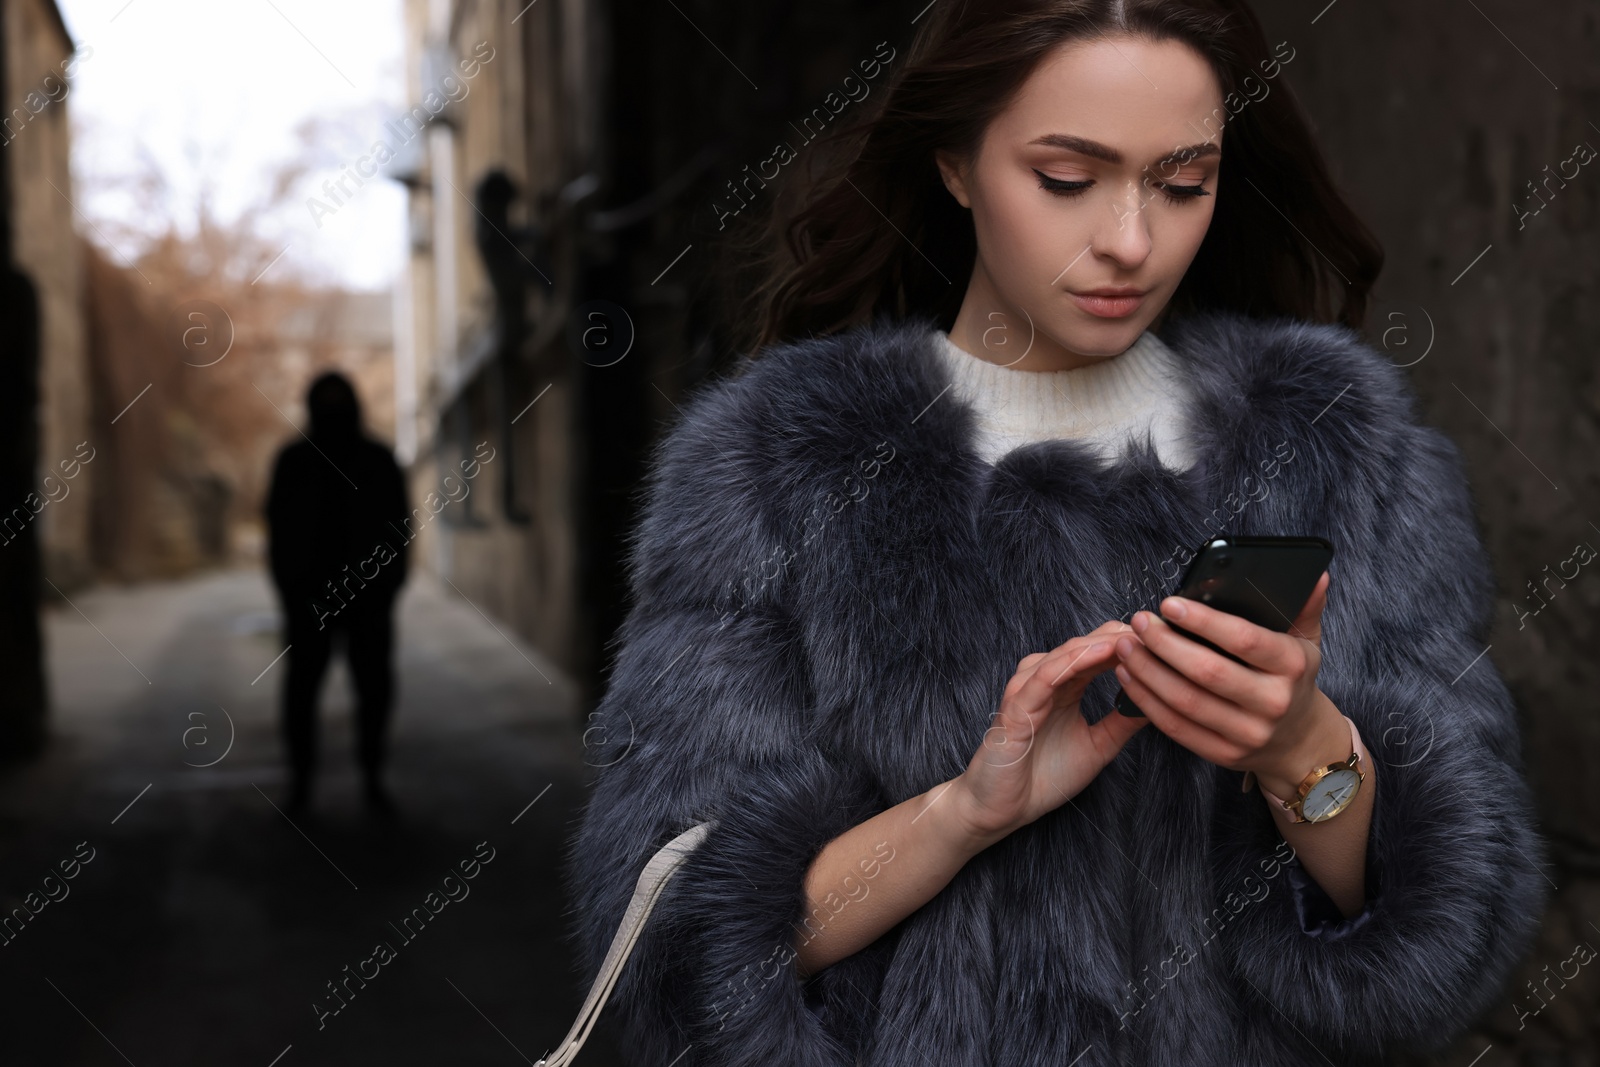 Photo of Man stalking young woman with phone in alley